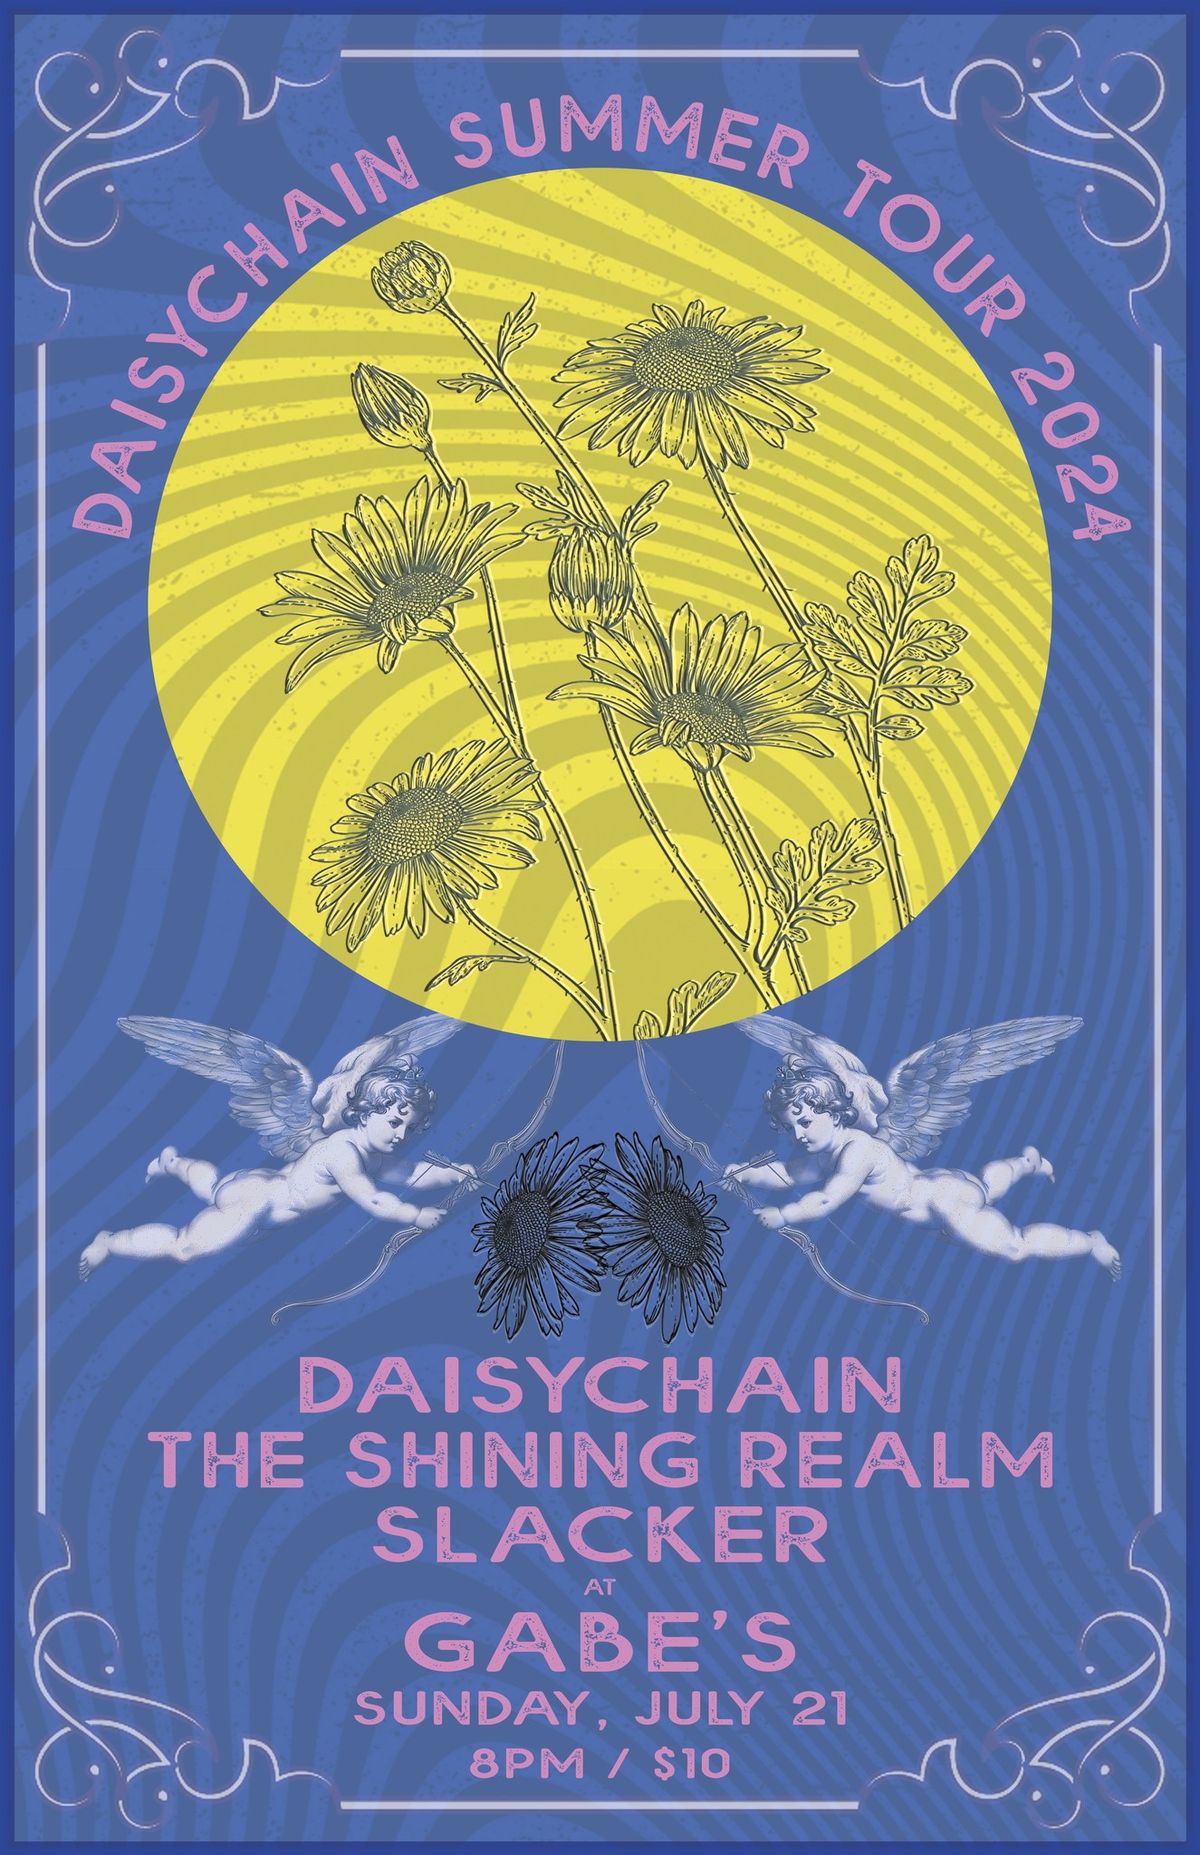 Daisychain, Shining Realm and Slacker at Gabe's